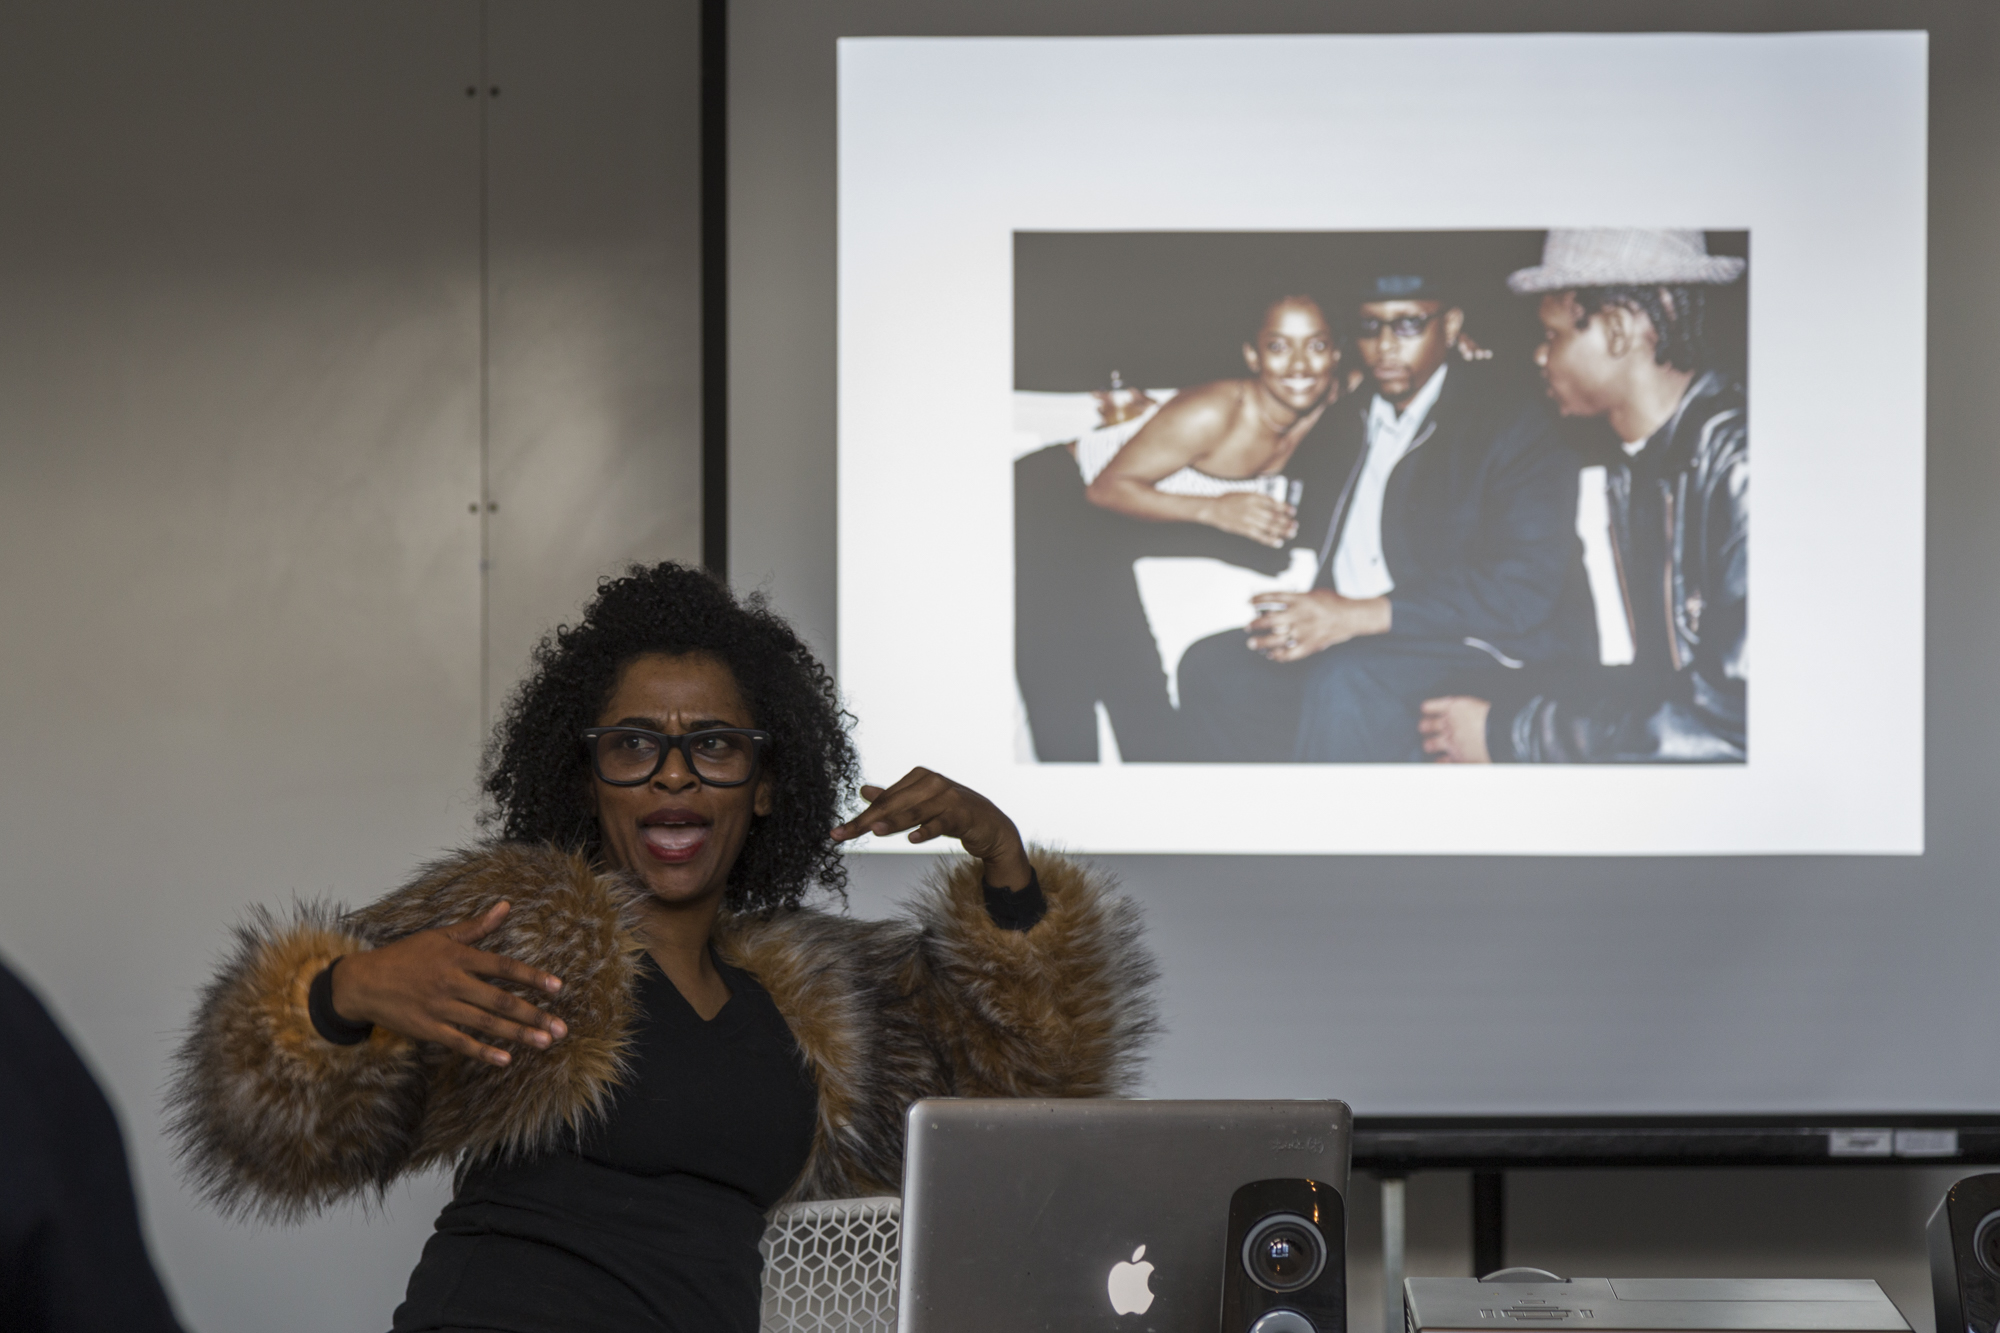    Who's Musing Who?:   An intimate dialog with Interdisciplinary Artist  Tameka Norris  discussing intellectual property, authorship, and socioeconomic status as it relates to personal legacy in a digital era. 